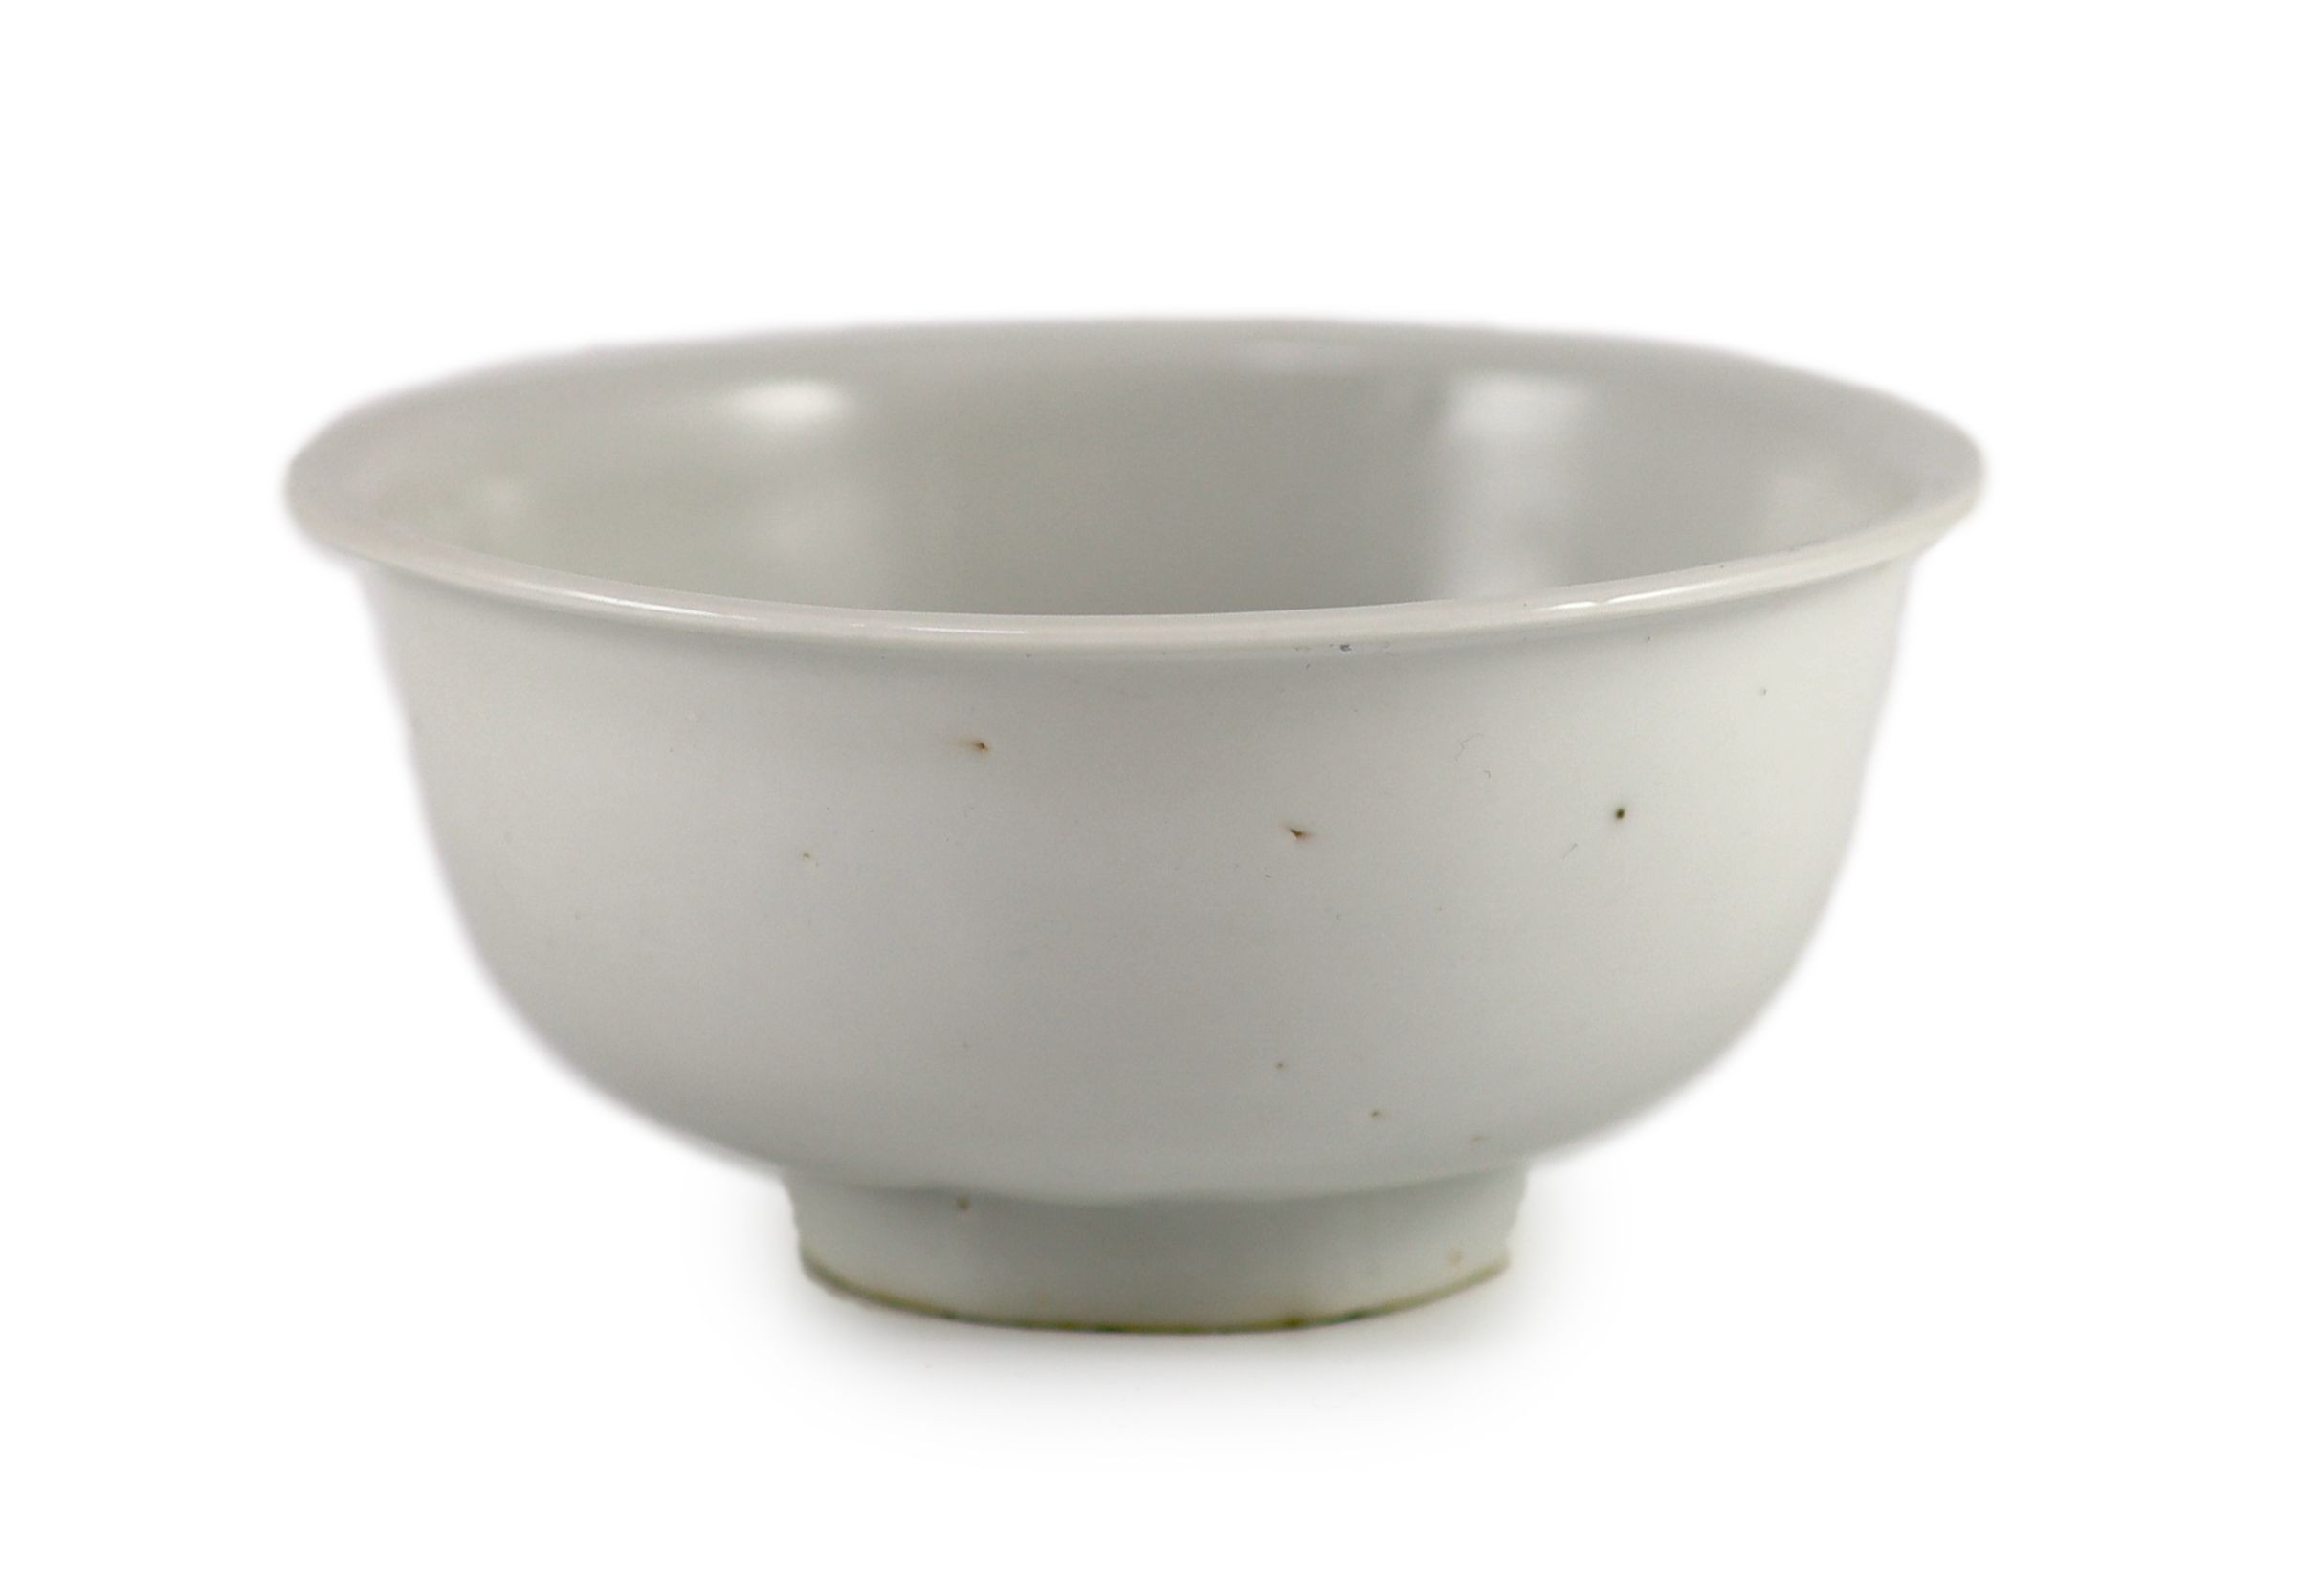 A Chinese white glazed bowl, mid-Ming dynasty, 15th/16th century, 14.5cm diameter